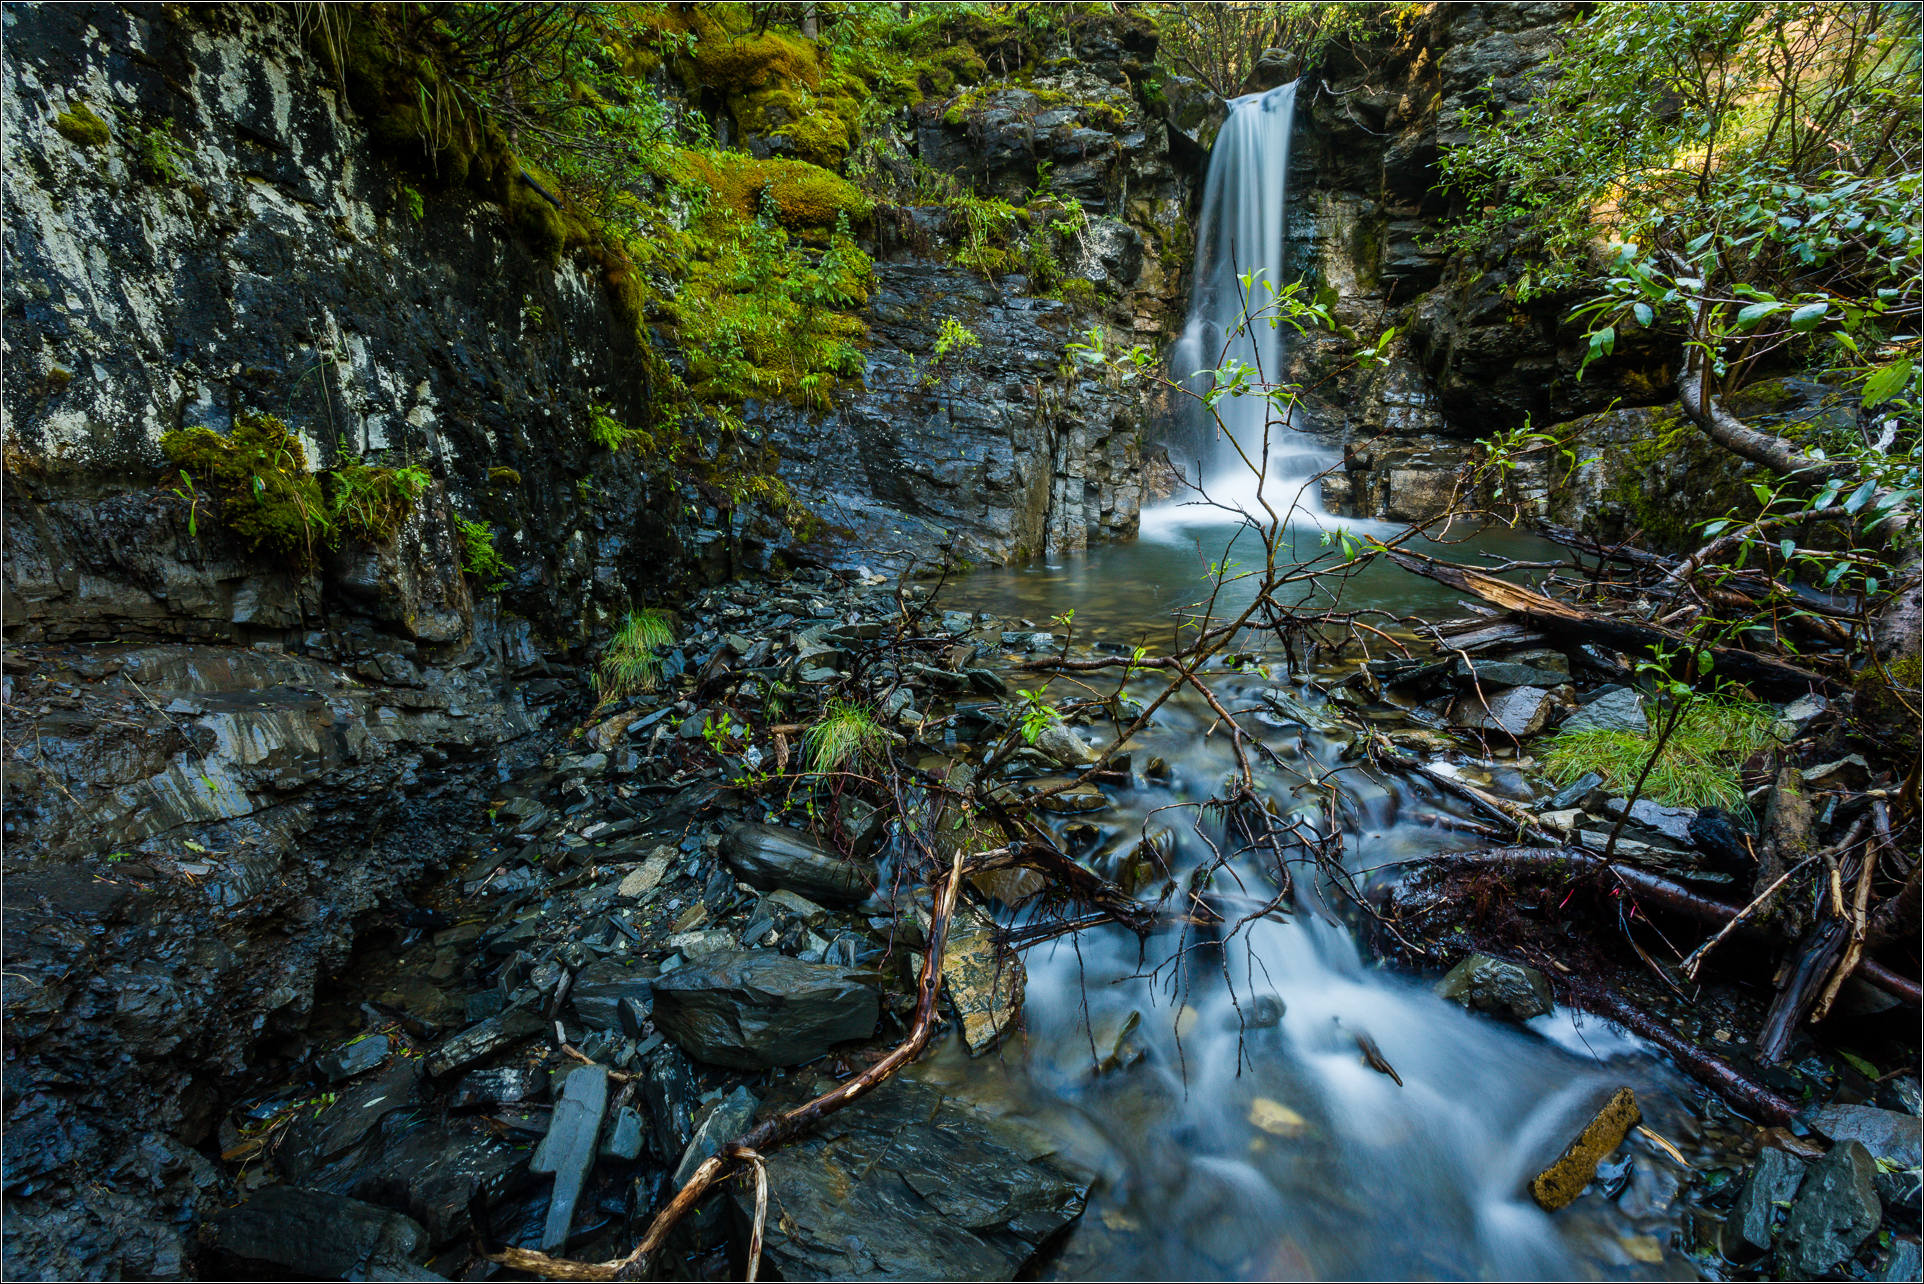 A secluded waterfall in Kananaskis | Christopher Martin Photography